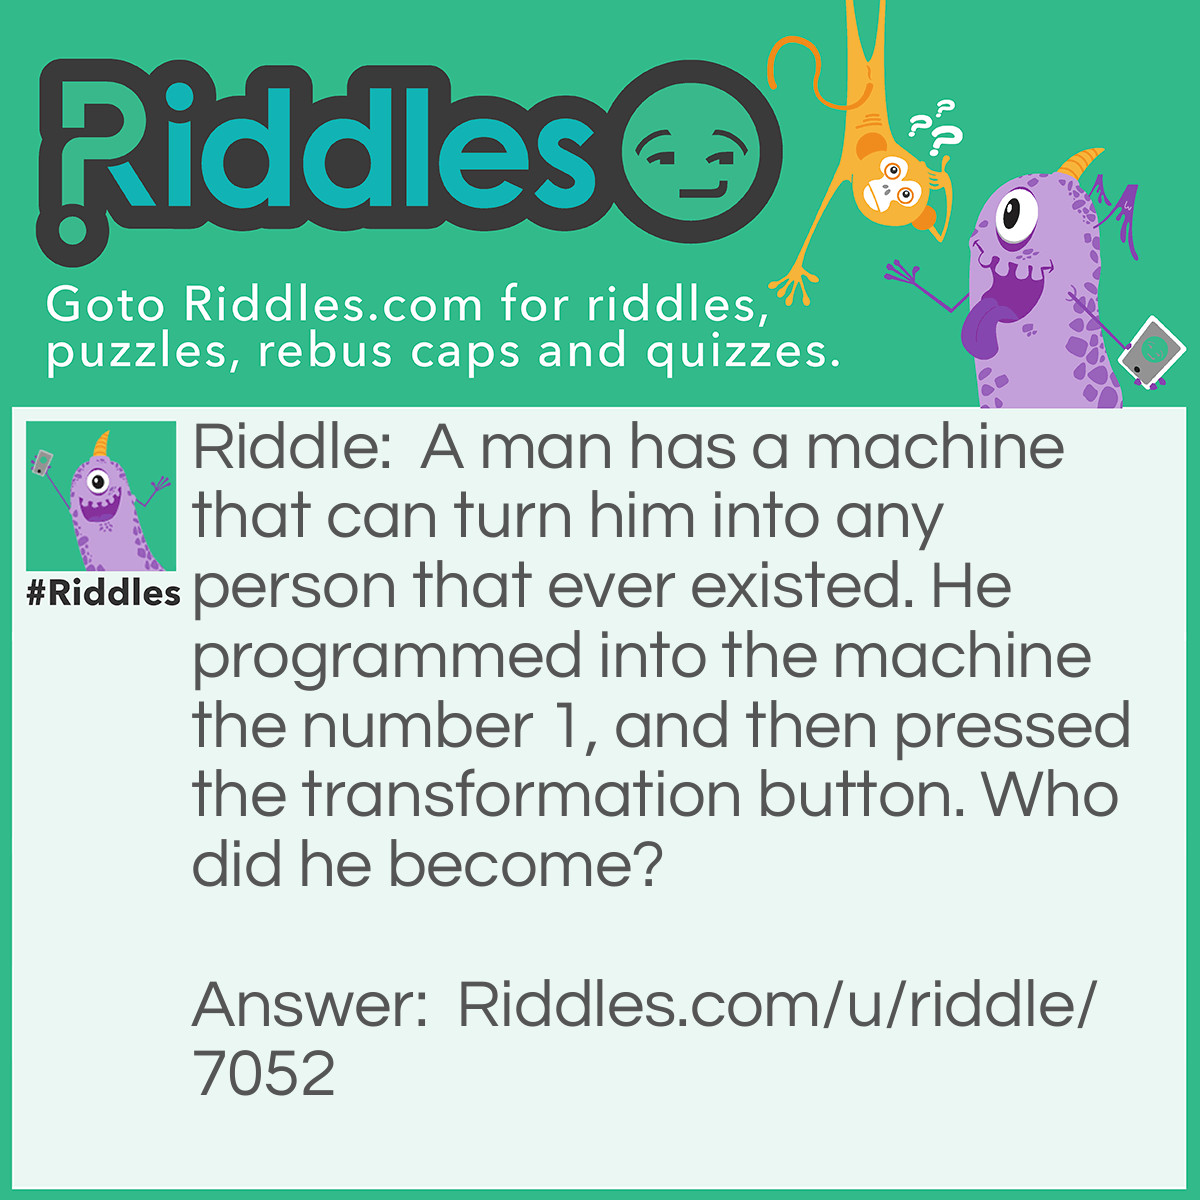 Riddle: A man has a machine that can turn him into any person that ever existed. He programmed into the machine the number 1, and then pressed the transformation button. Who did he become? Answer: Adam.